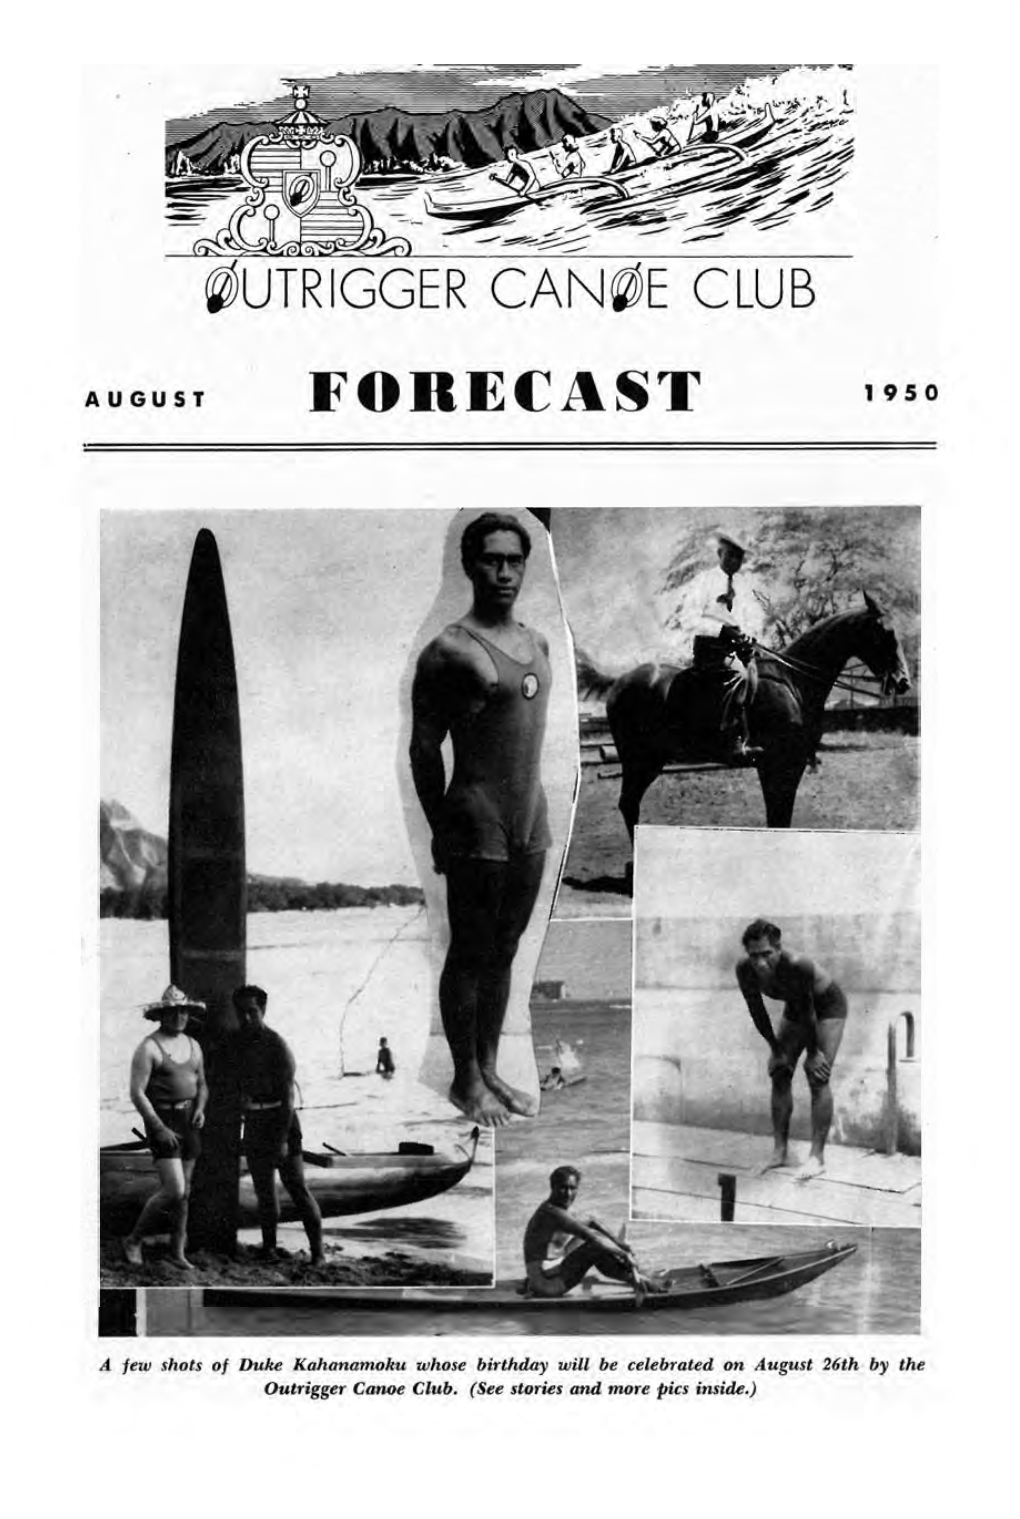 Duke Kahanamoku Whose Birthday Will Be Celebrated on August 26Th by the Outrigger Canoe Club